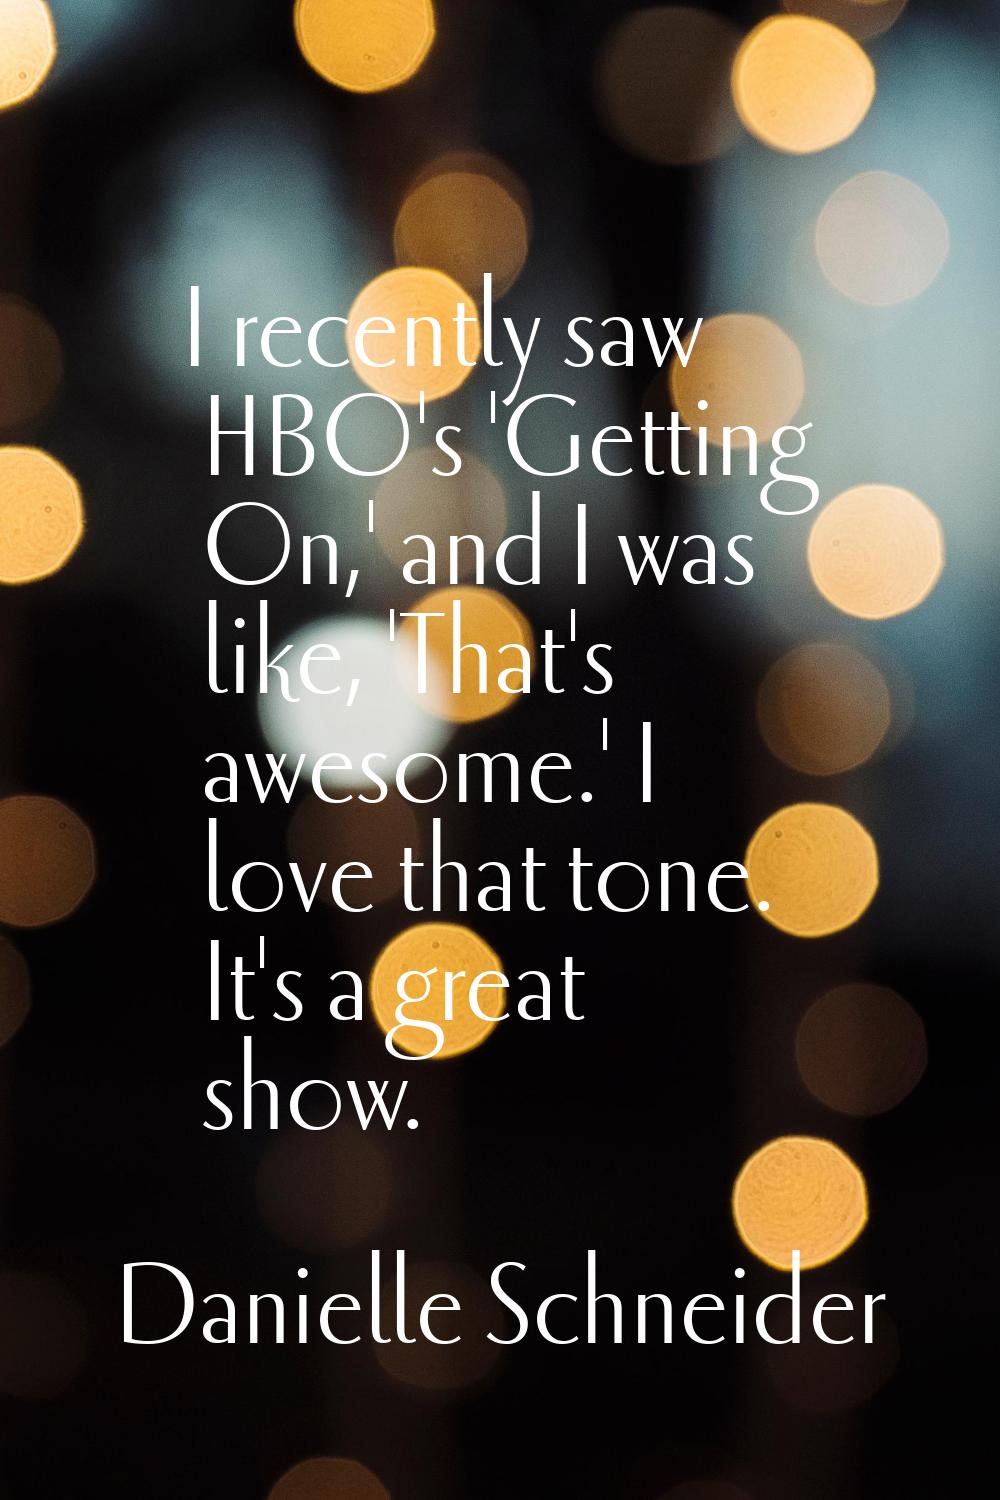 I recently saw HBO's 'Getting On,' and I was like, 'That's awesome.' I love that tone. It's a great